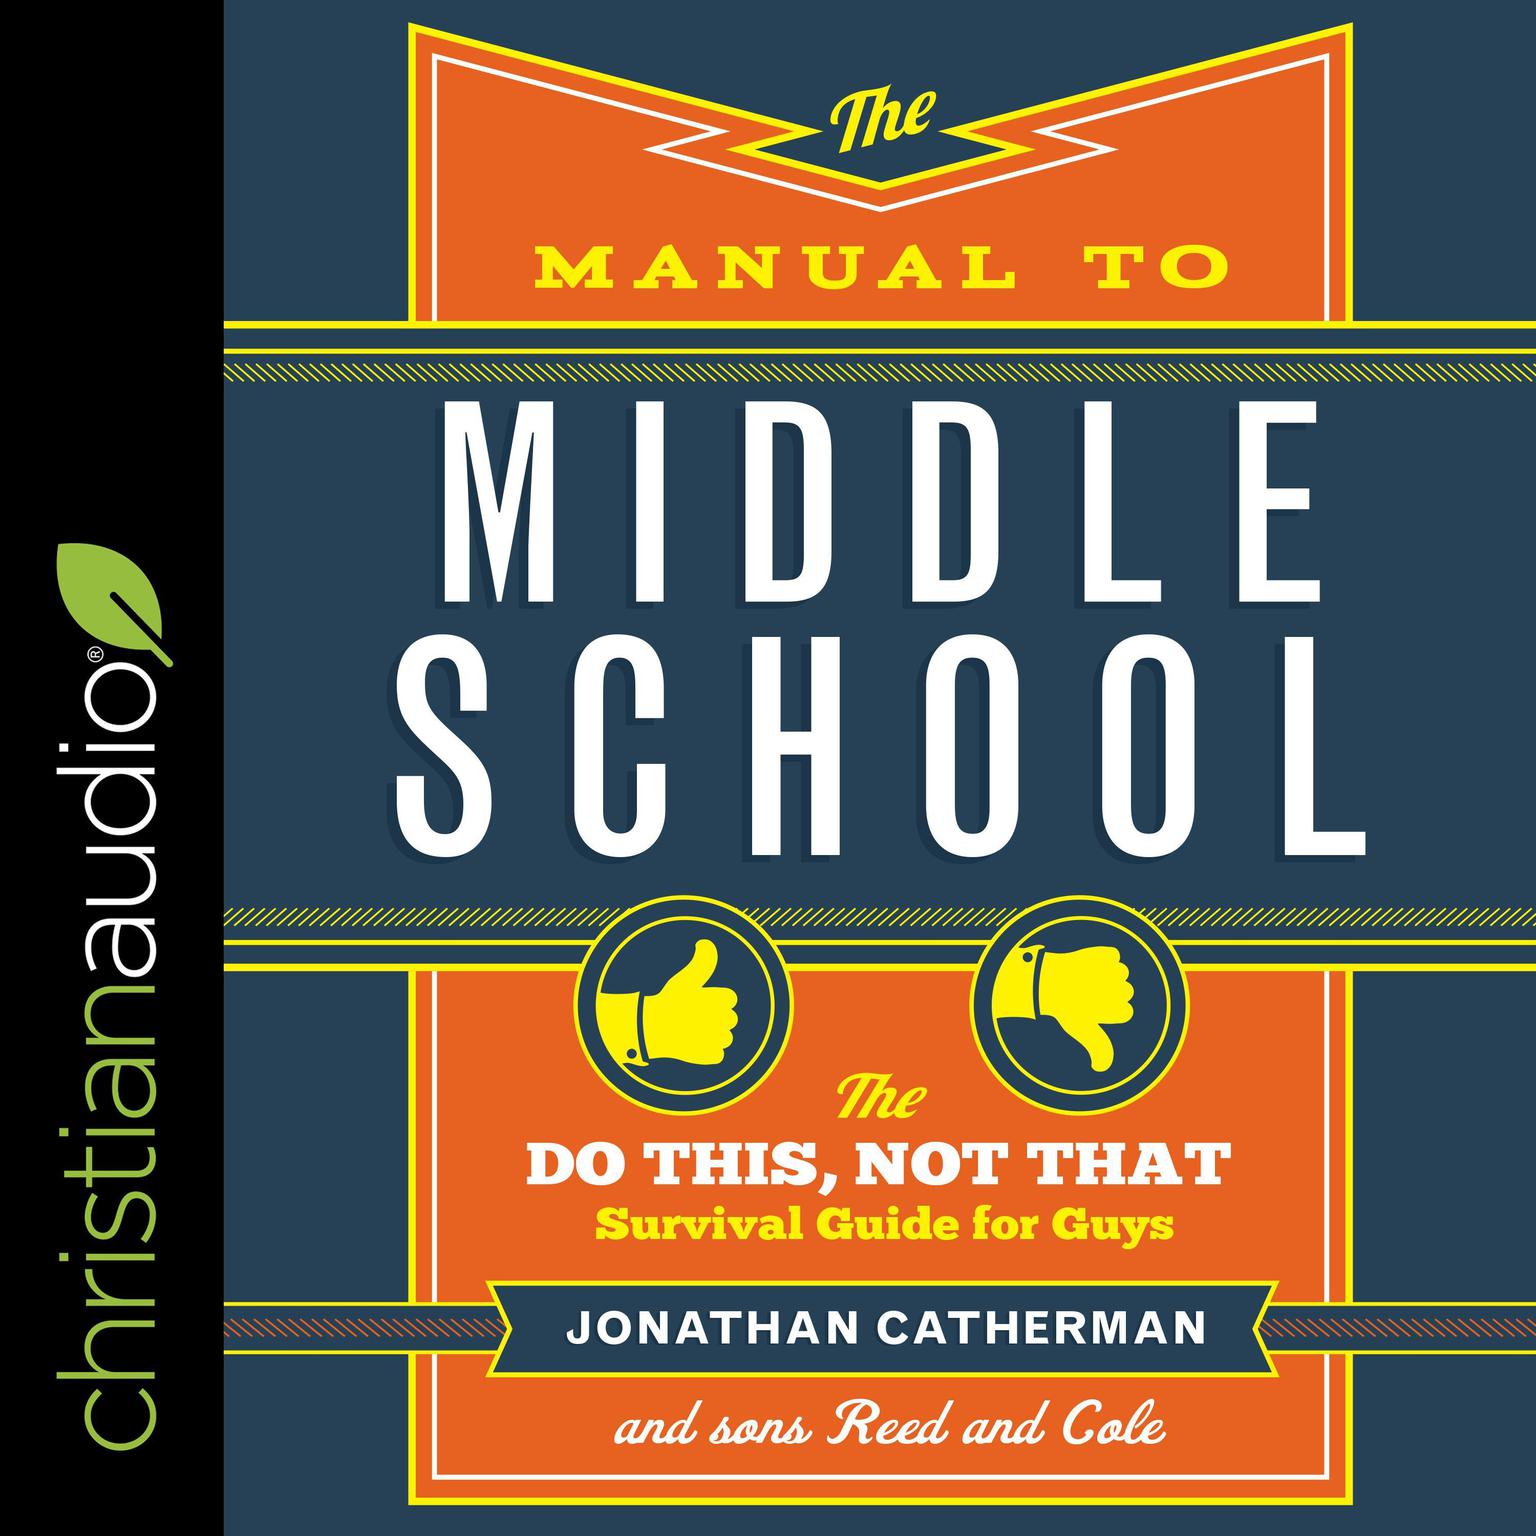 The Manual to Middle School: The “Do This, Not That” Survival Guide for Guys Audiobook, by Jonathan Catherman